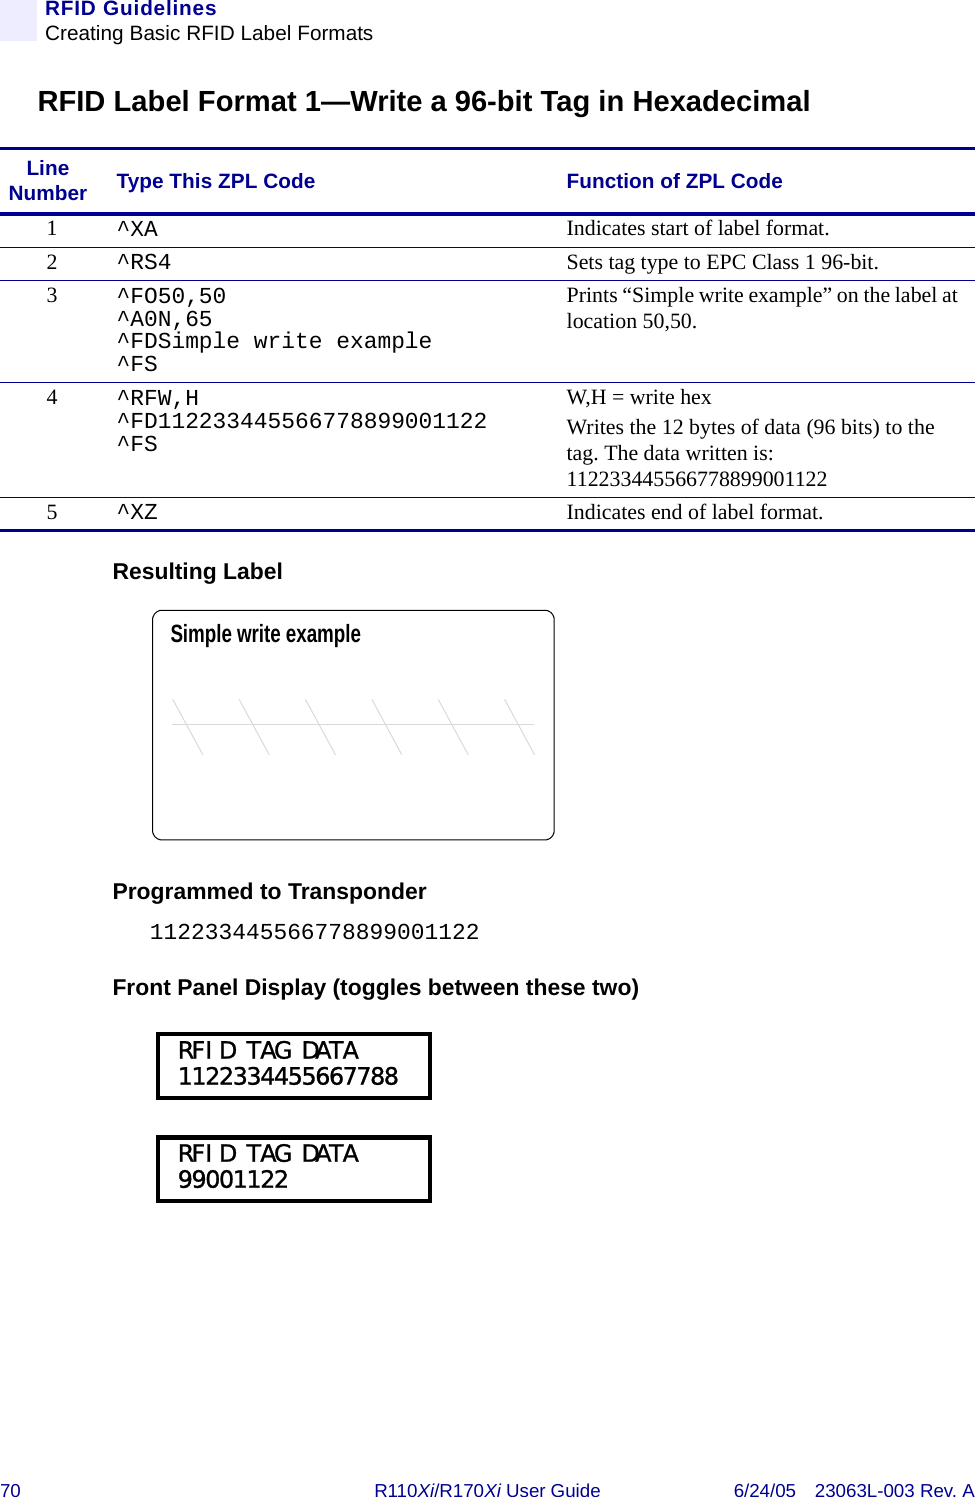 70 R110Xi/R170Xi User Guide 6/24/05 23063L-003 Rev. ARFID GuidelinesCreating Basic RFID Label FormatsRFID Label Format 1—Write a 96-bit Tag in HexadecimalResulting LabelProgrammed to Transponder112233445566778899001122Front Panel Display (toggles between these two)Line Number Type This ZPL Code Function of ZPL Code1^XA Indicates start of label format.2^RS4 Sets tag type to EPC Class 1 96-bit.3^FO50,50^A0N,65^FDSimple write example^FSPrints “Simple write example” on the label at location 50,50.4^RFW,H^FD112233445566778899001122^FSW,H = write hexWrites the 12 bytes of data (96 bits) to the tag. The data written is: 1122334455667788990011225^XZ Indicates end of label format.Simple write example RFID TAG DATA 1122334455667788 RFID TAG DATA 99001122